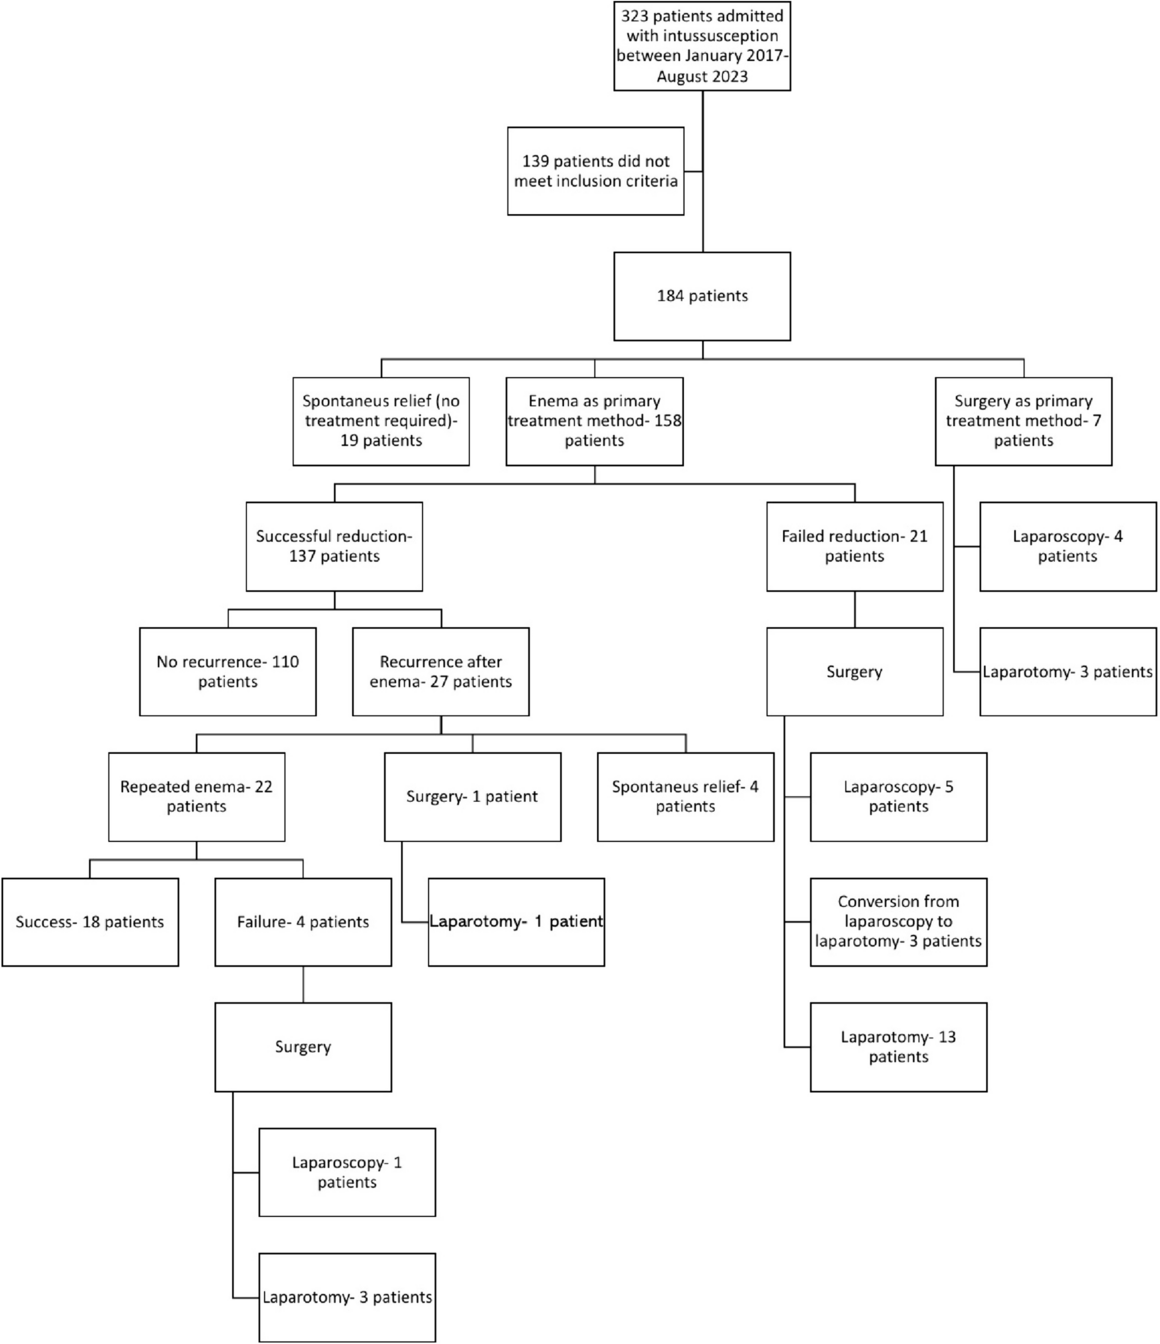 Predictive factors for failure of nonsurgical management of intussusception and its in-hospital recurrence in pediatric patients: a large retrospective single-center study